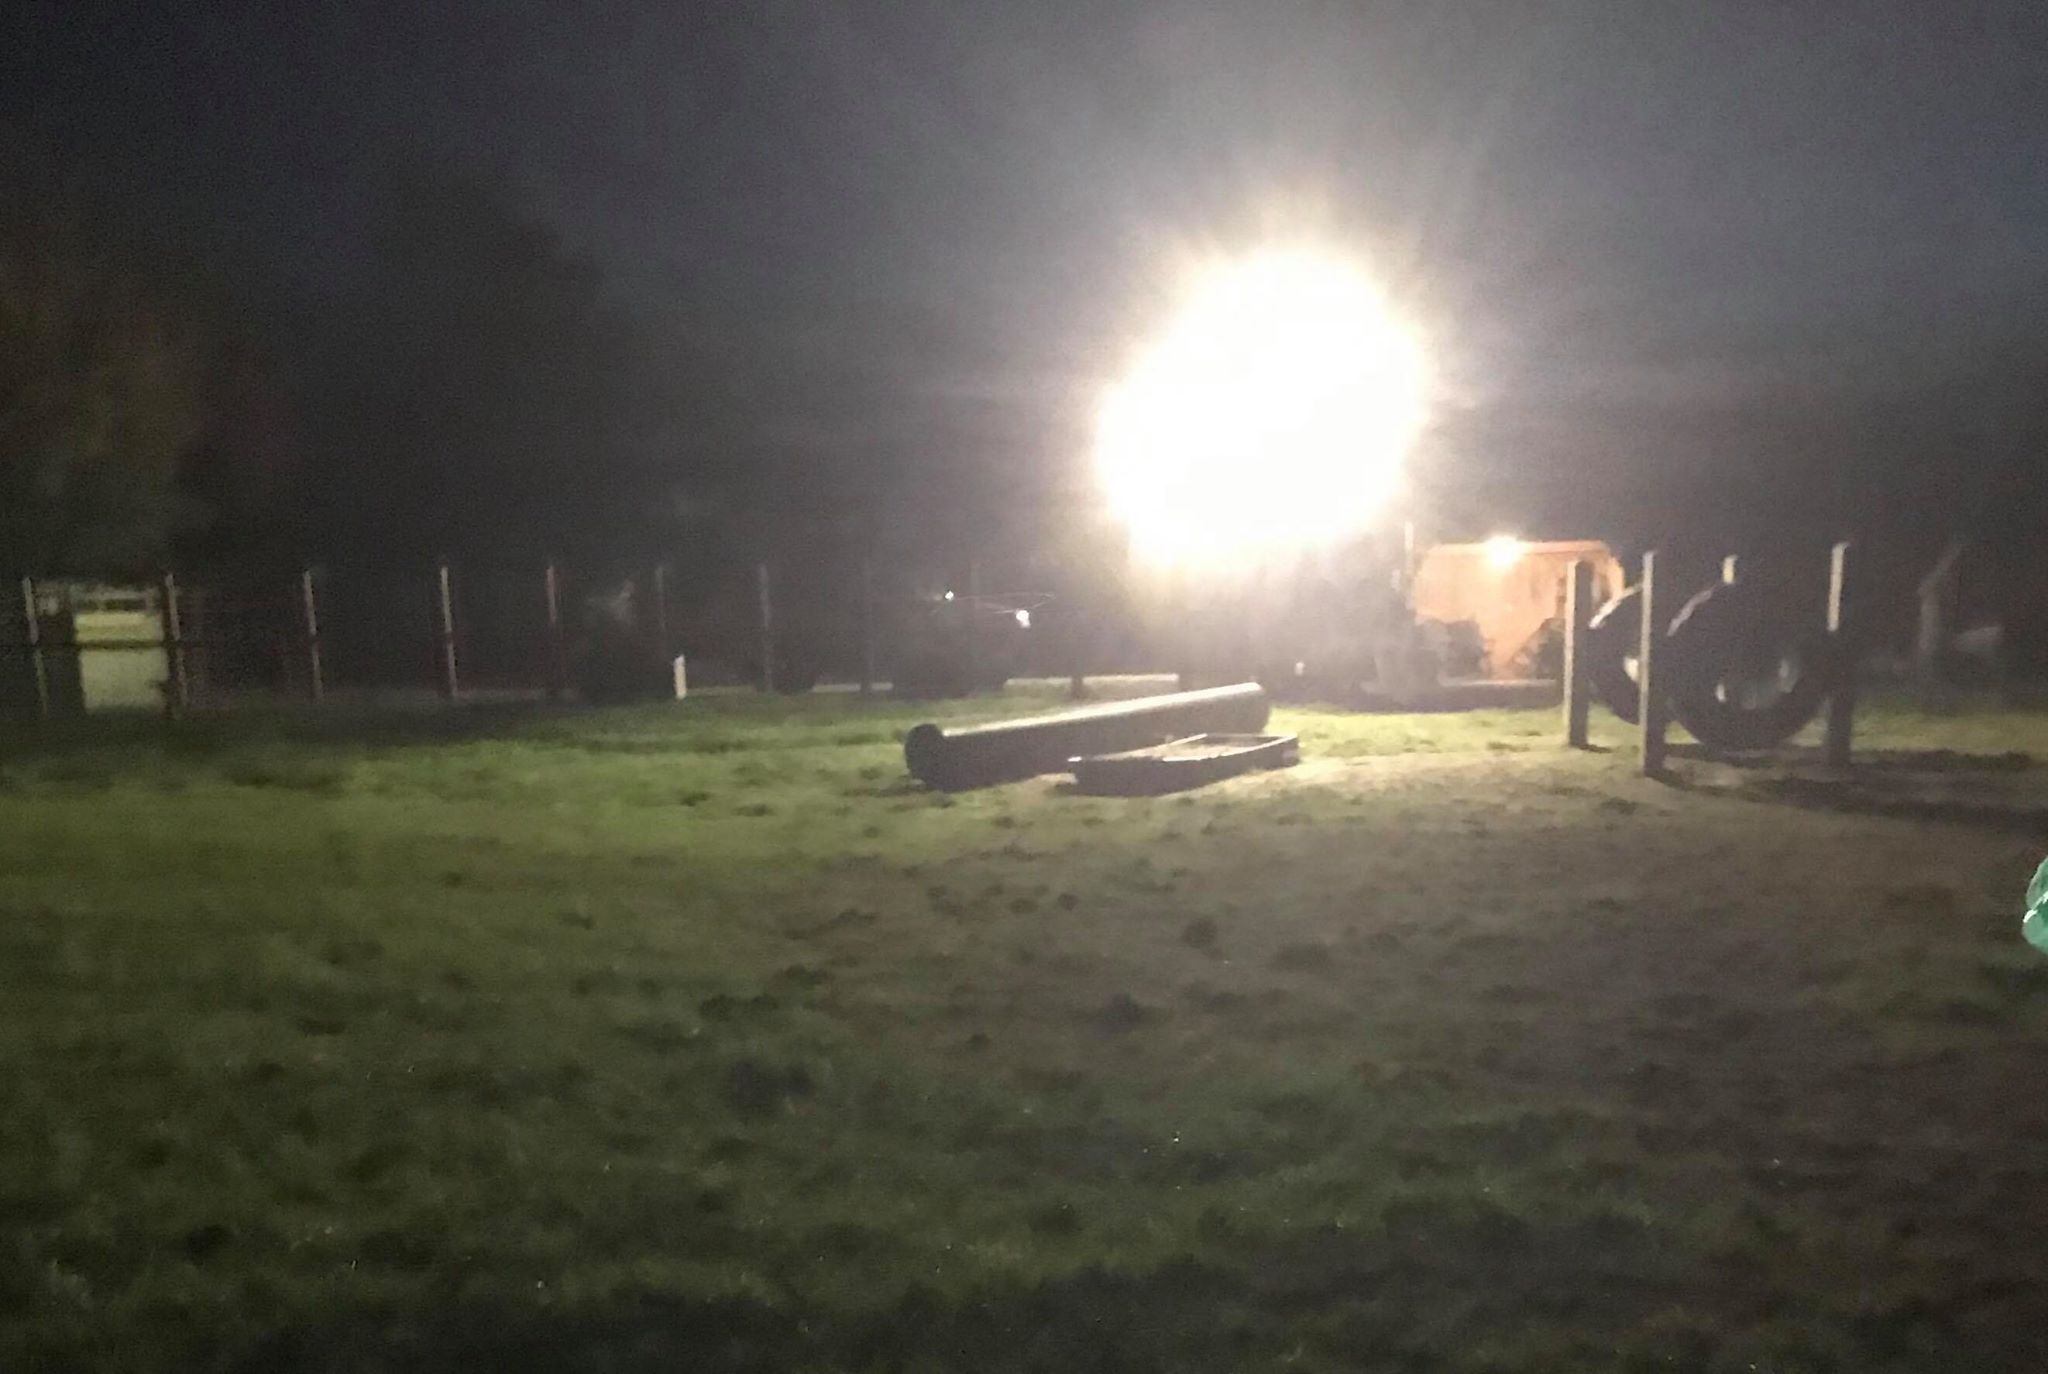 A night view showing the agility equipment